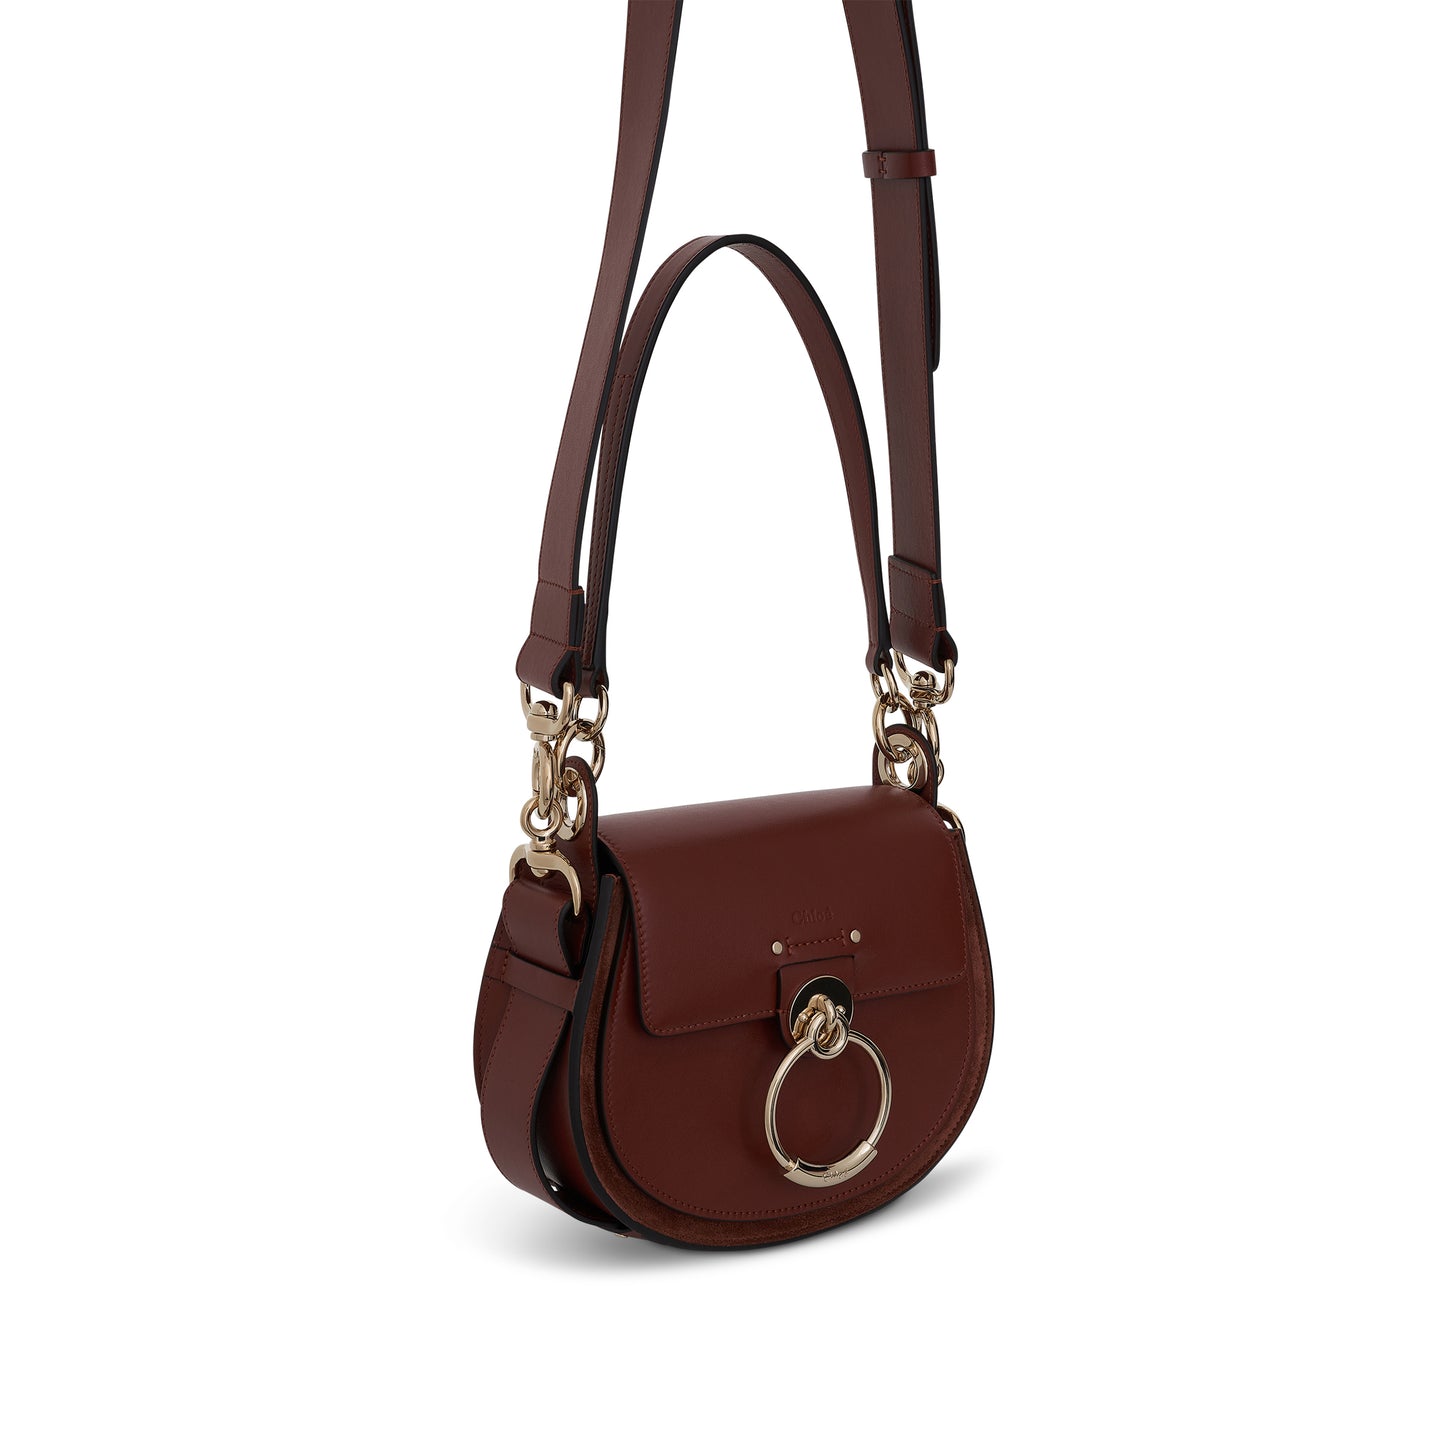 Small Tess Bag in Shiny & Suede Calfskin in Autumnal Brown